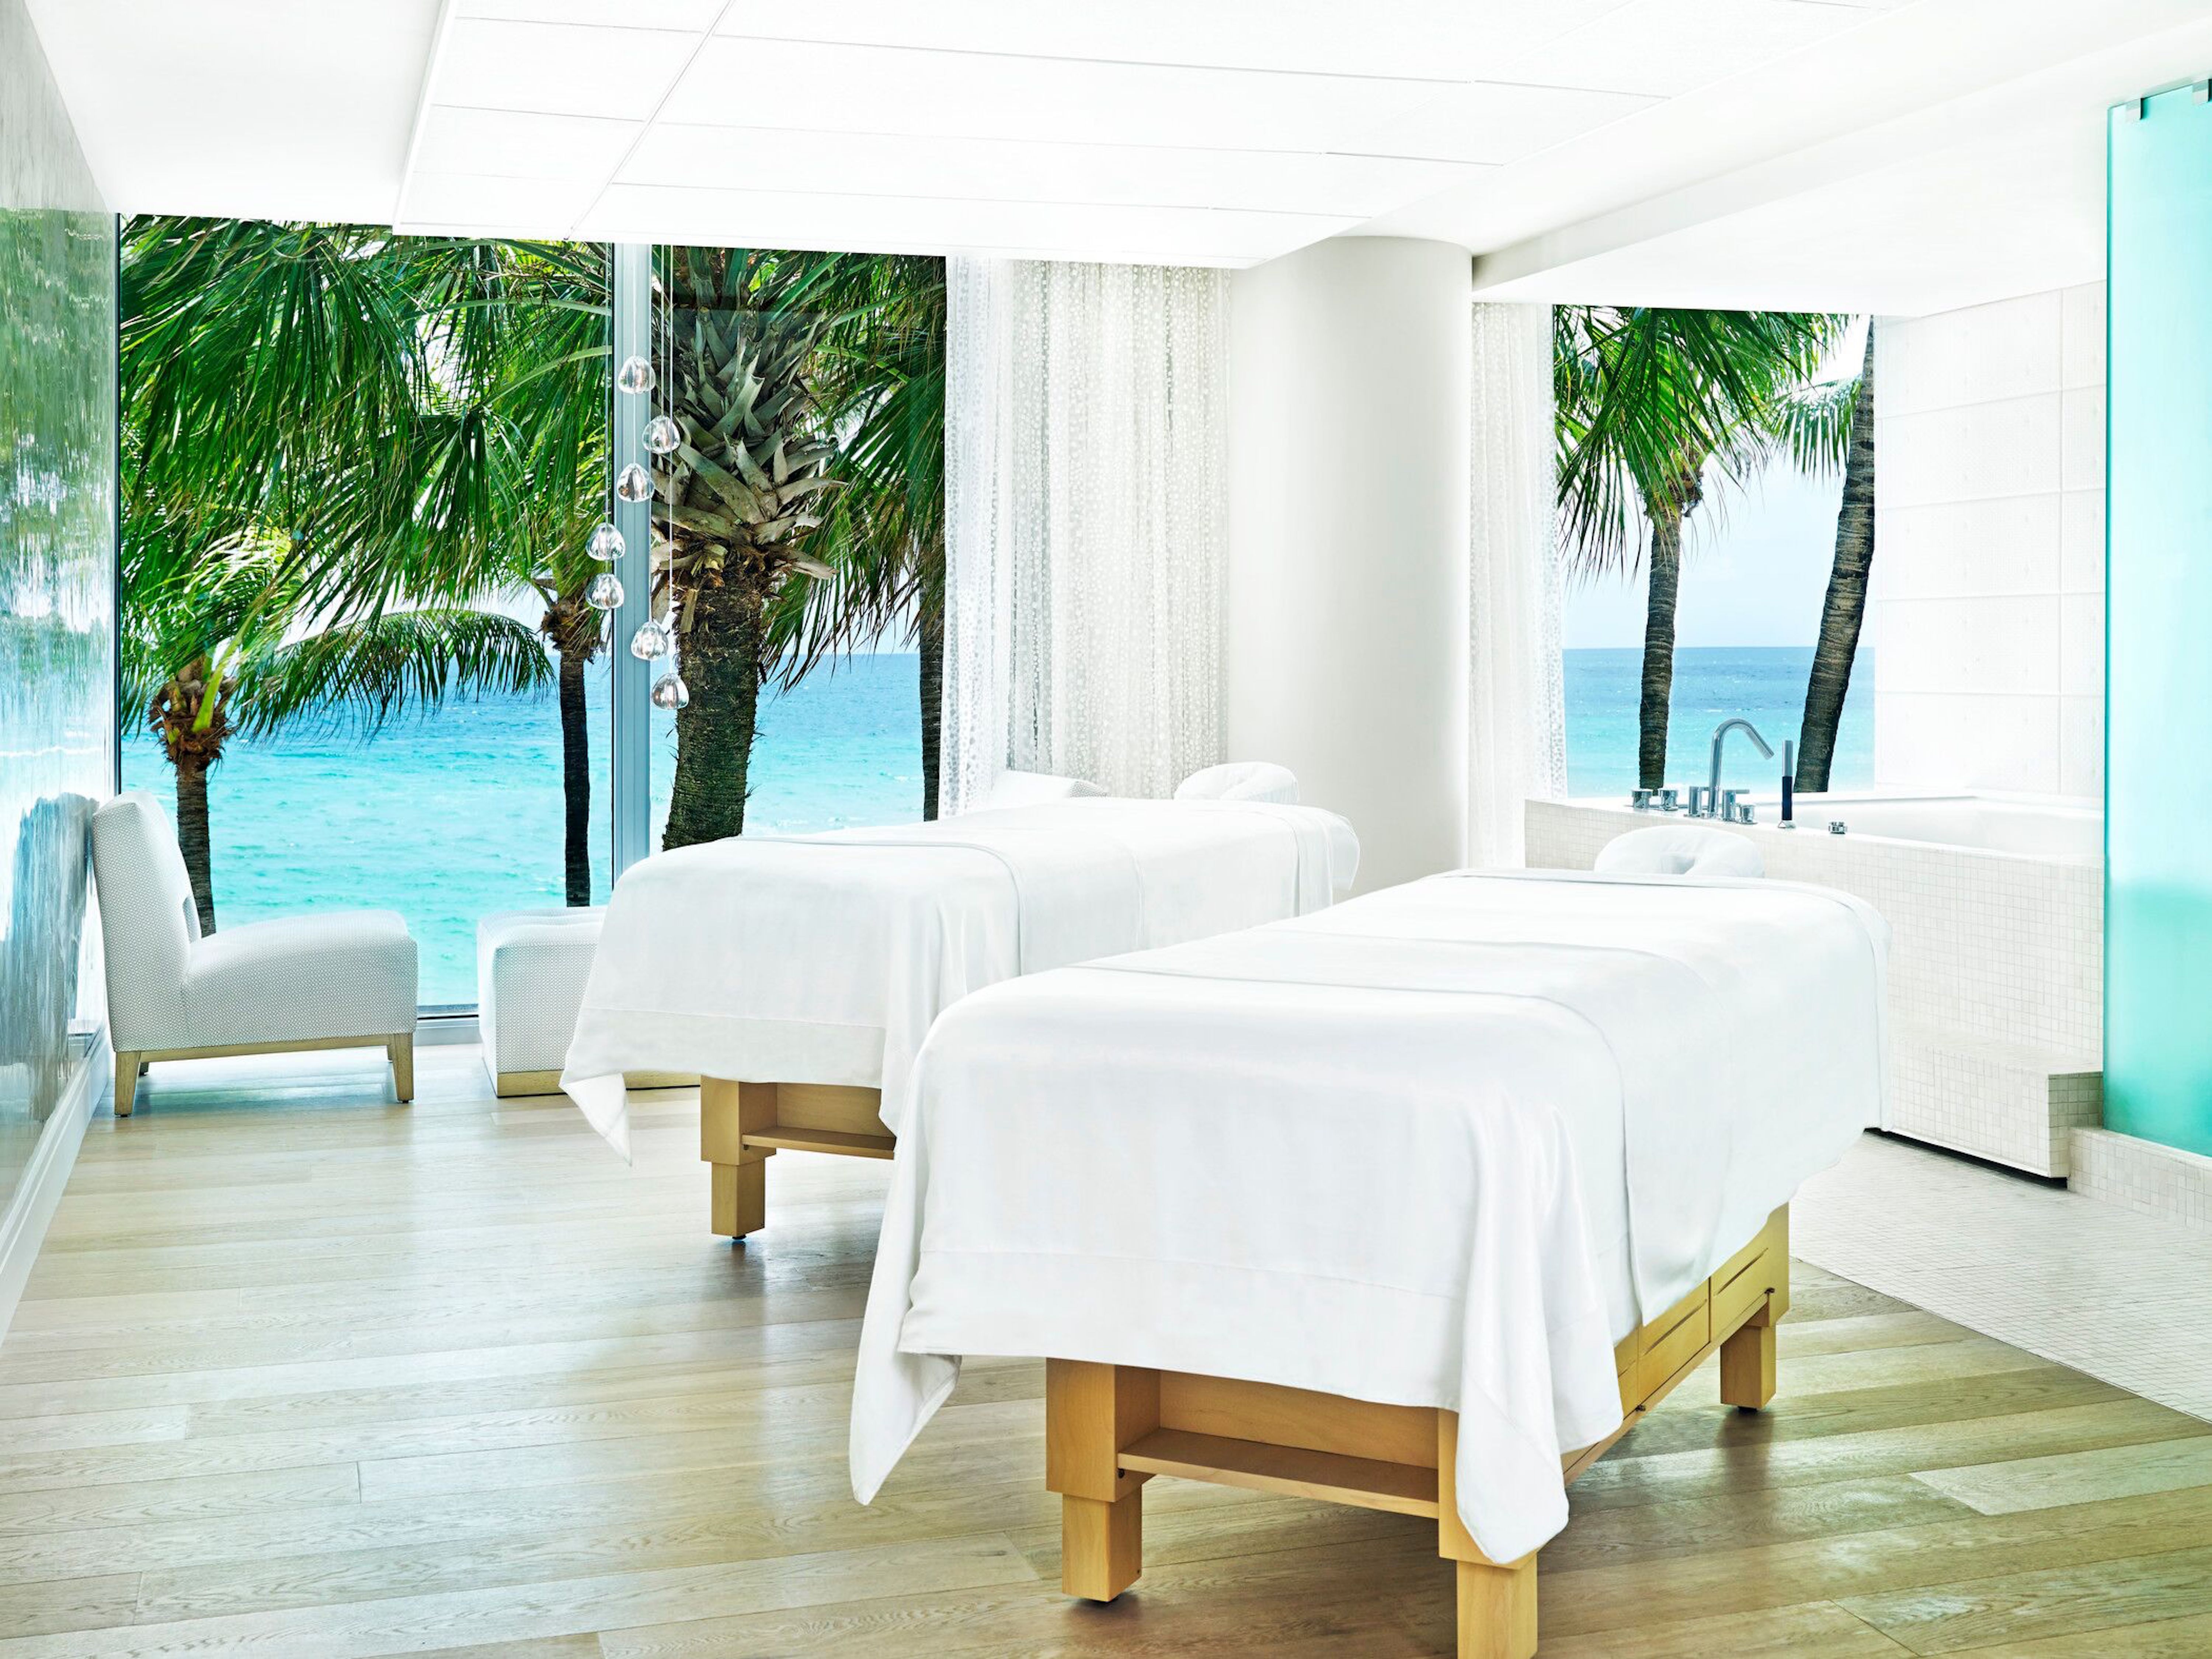 The Diplomat Spa  Wellness at The Diplomat Beach Resort  Photo Courtesy of Greater Fort Lauderdale Convention  Visitors Bu